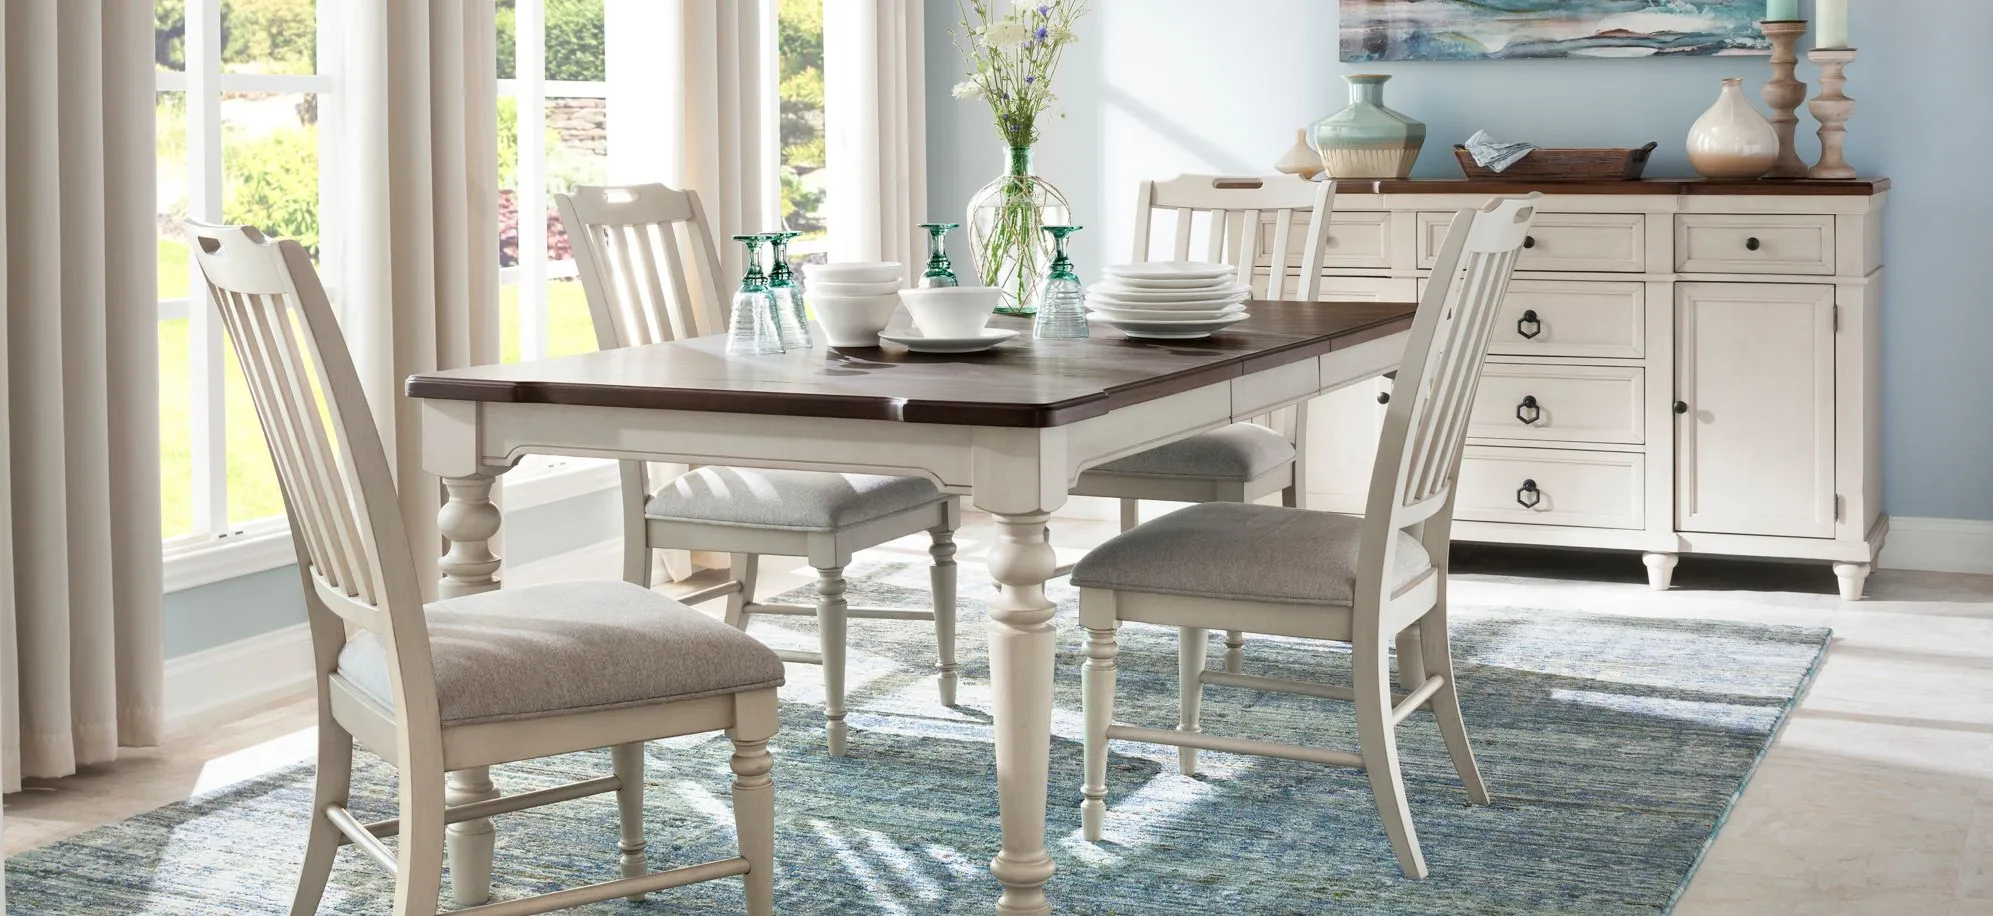 Saybrook 5-pc. Dining Set in Two-tone by Davis Intl.